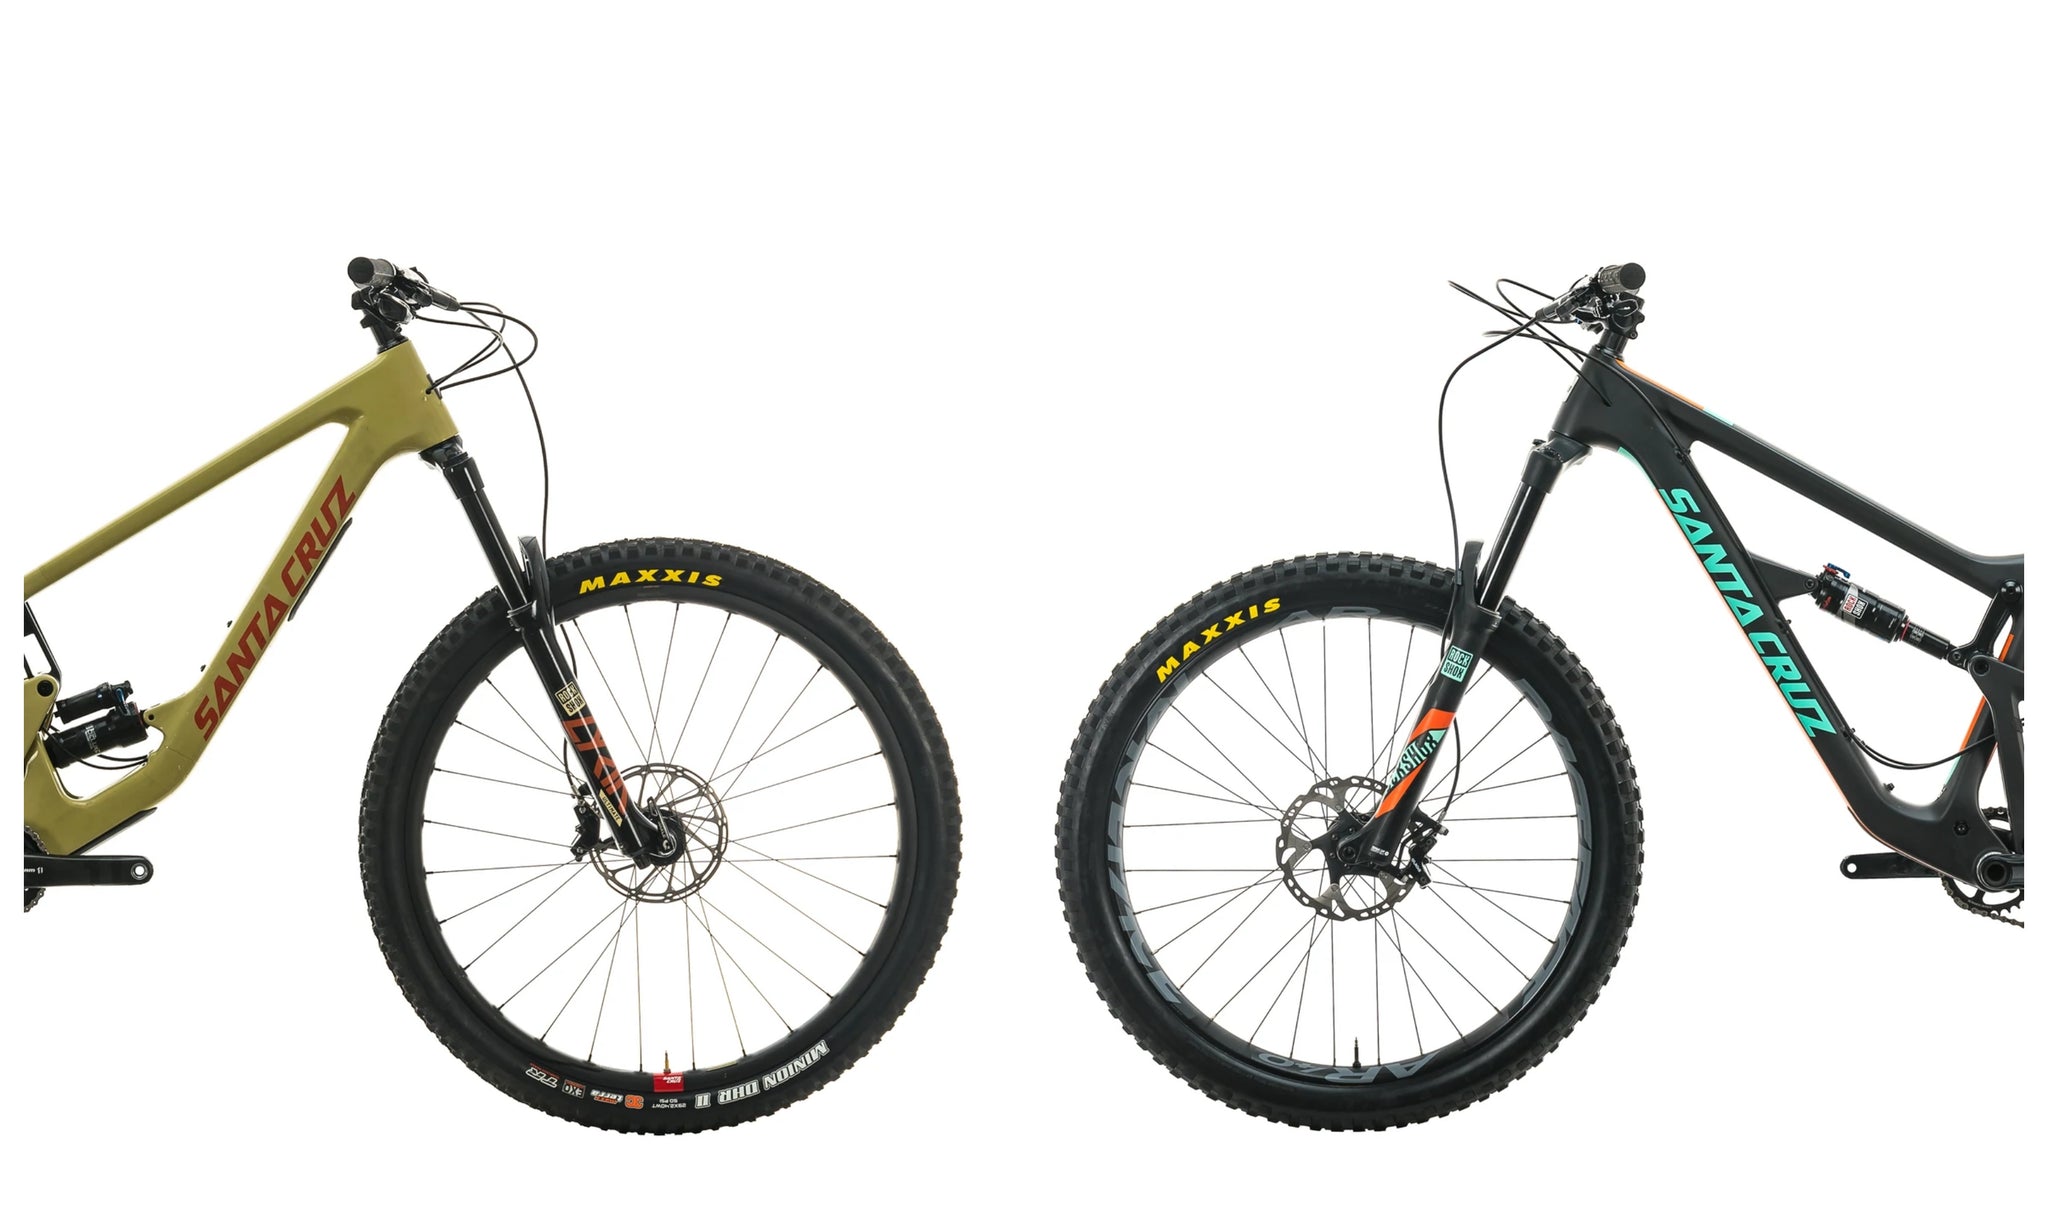 Hightower 29" vs. 27.5+ wheels and tires